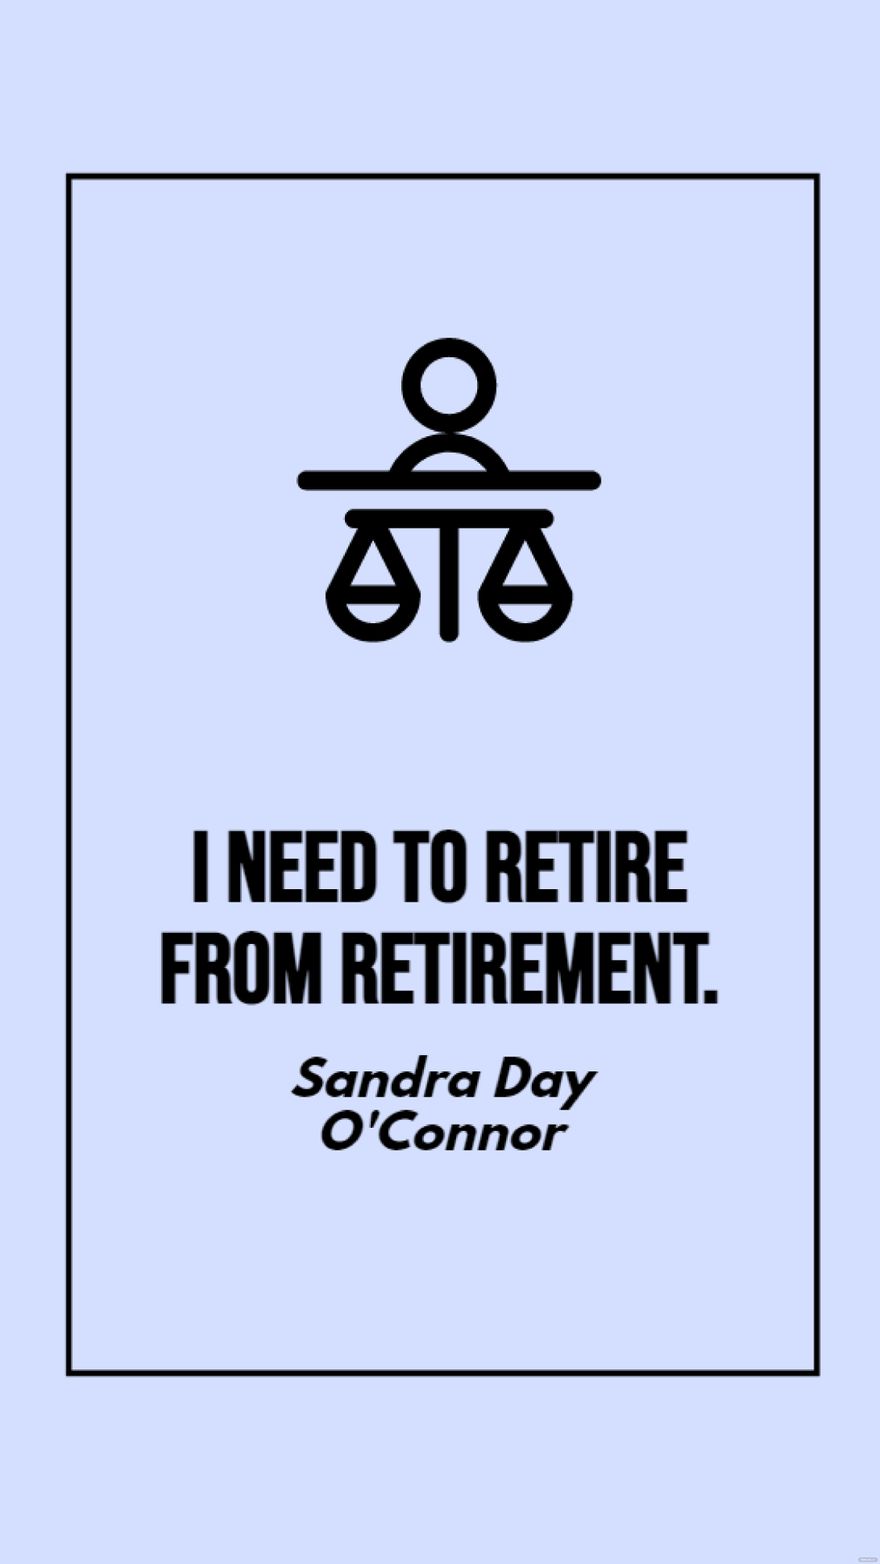 Sandra Day O'Connor - I need to retire from retirement.